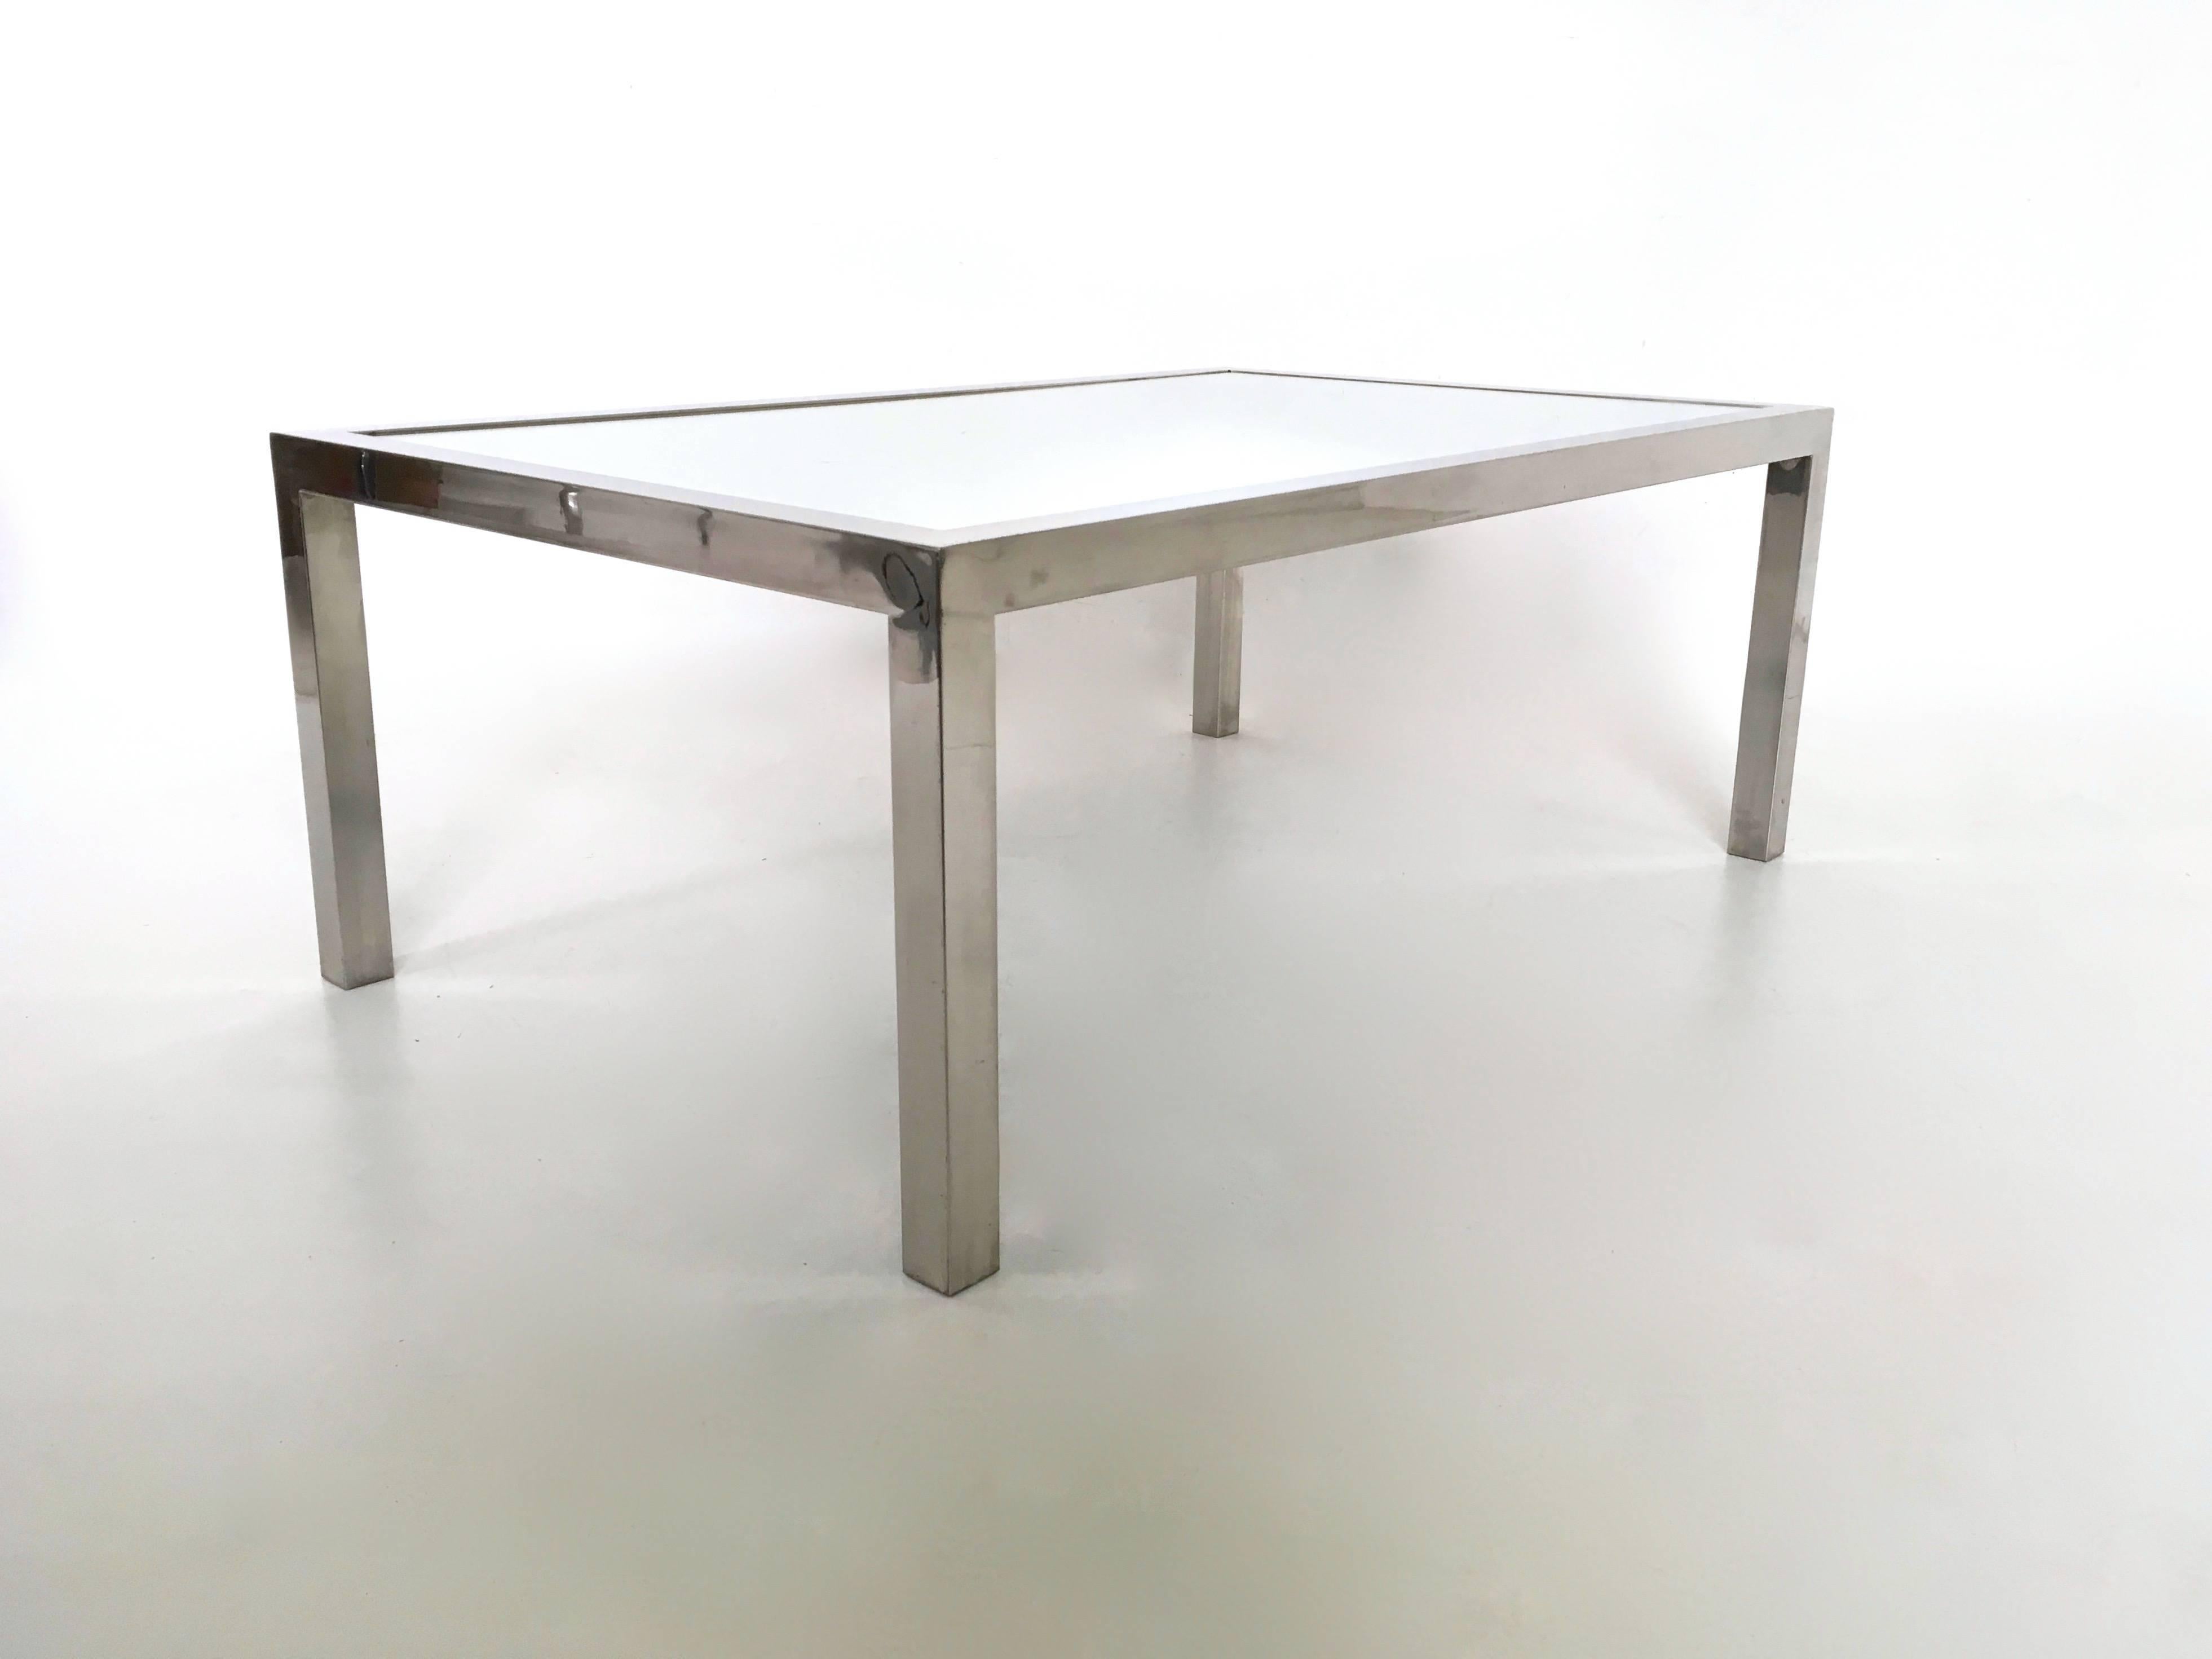 Italian Vintage Steel Coffee Table in the Style of Nanda Vigo with a Mirrored Top, Italy For Sale